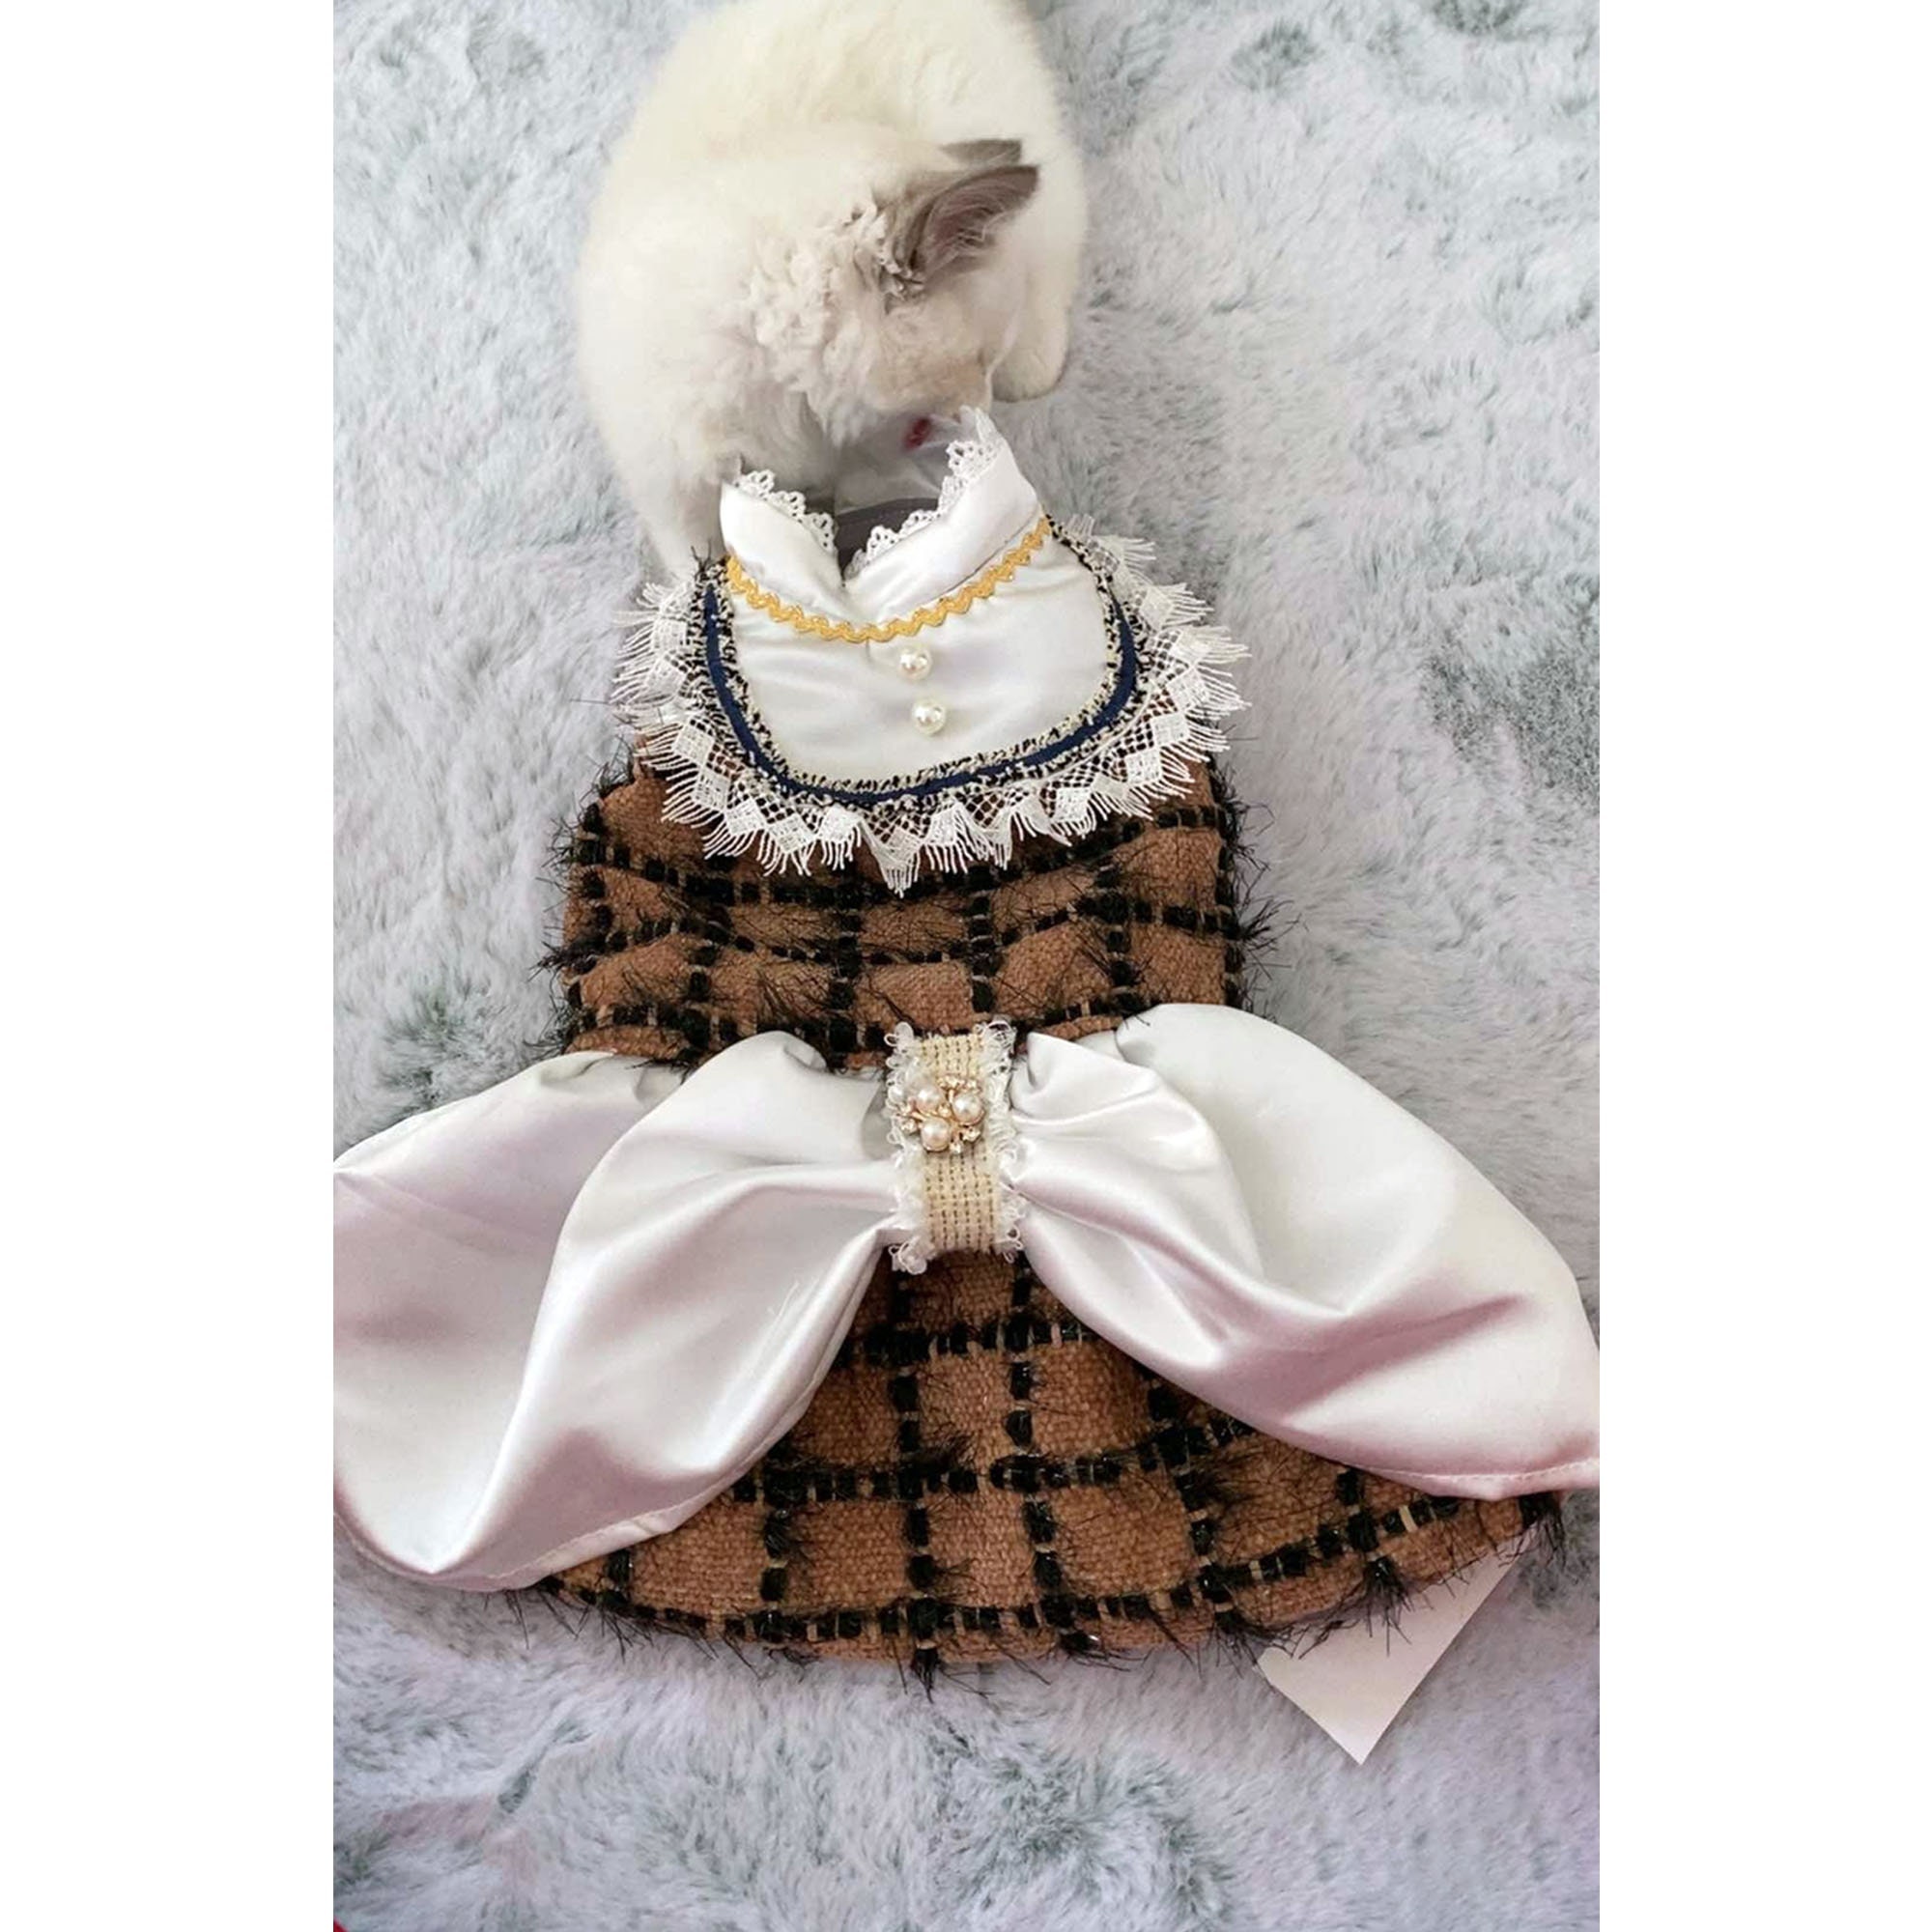 Tweed Dog Dress, Coco Princess Costume Vintage Luxury Style, Cat Dog  Birthday Outfit, Kitten Puppy Pet Winter Clothes, Pet Warm Tweed Coat